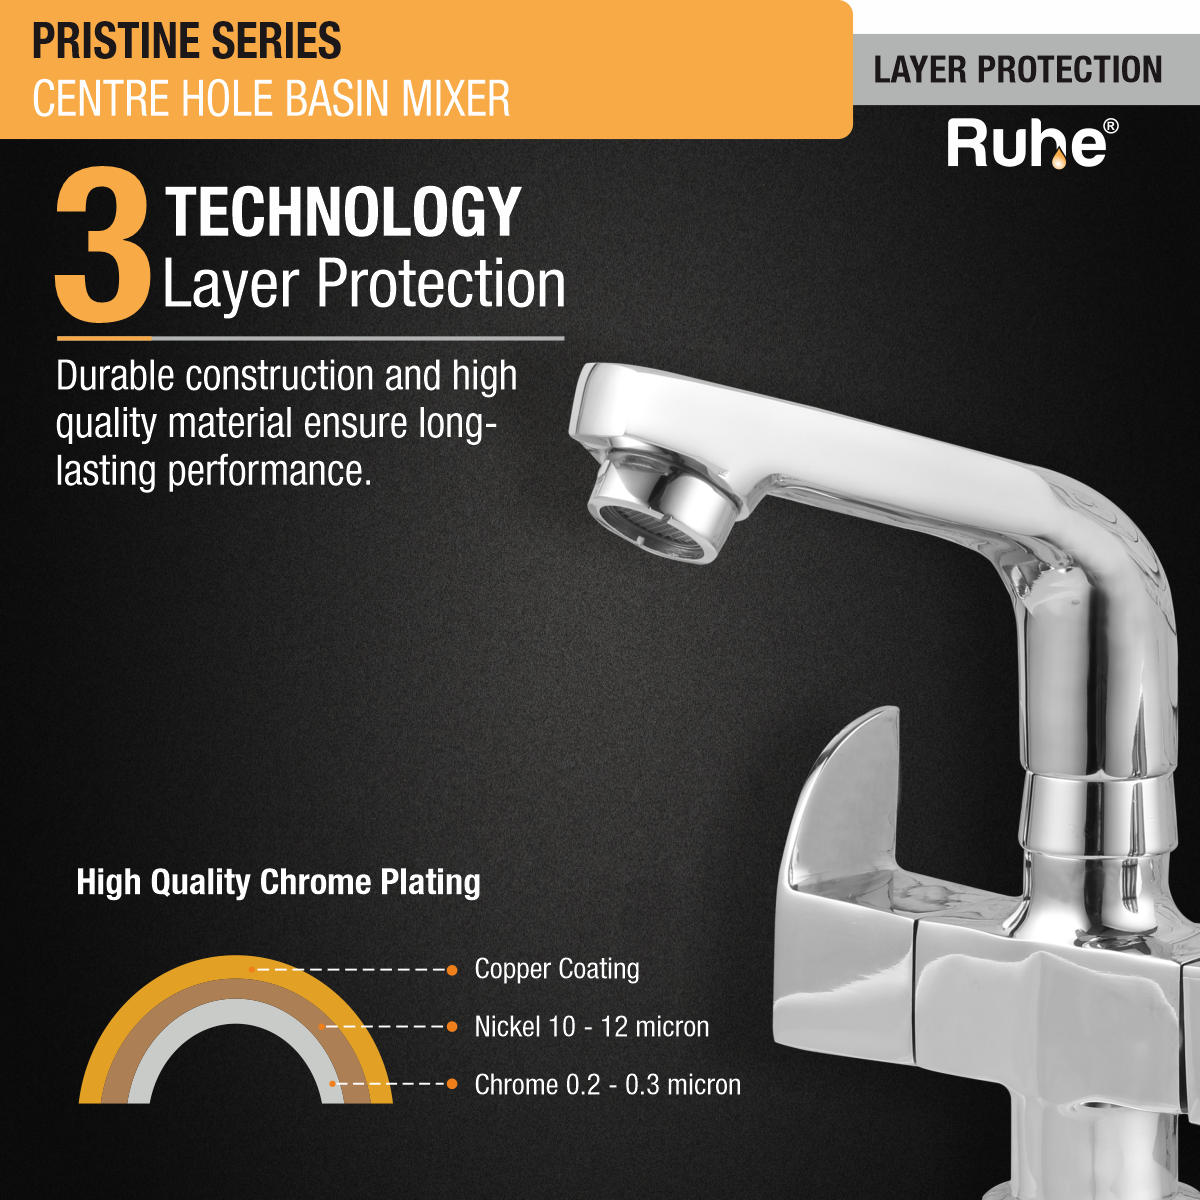 Pristine Centre Hole Basin Mixer with Small (7 inches) Swivel Spout Faucet 3 layer protection